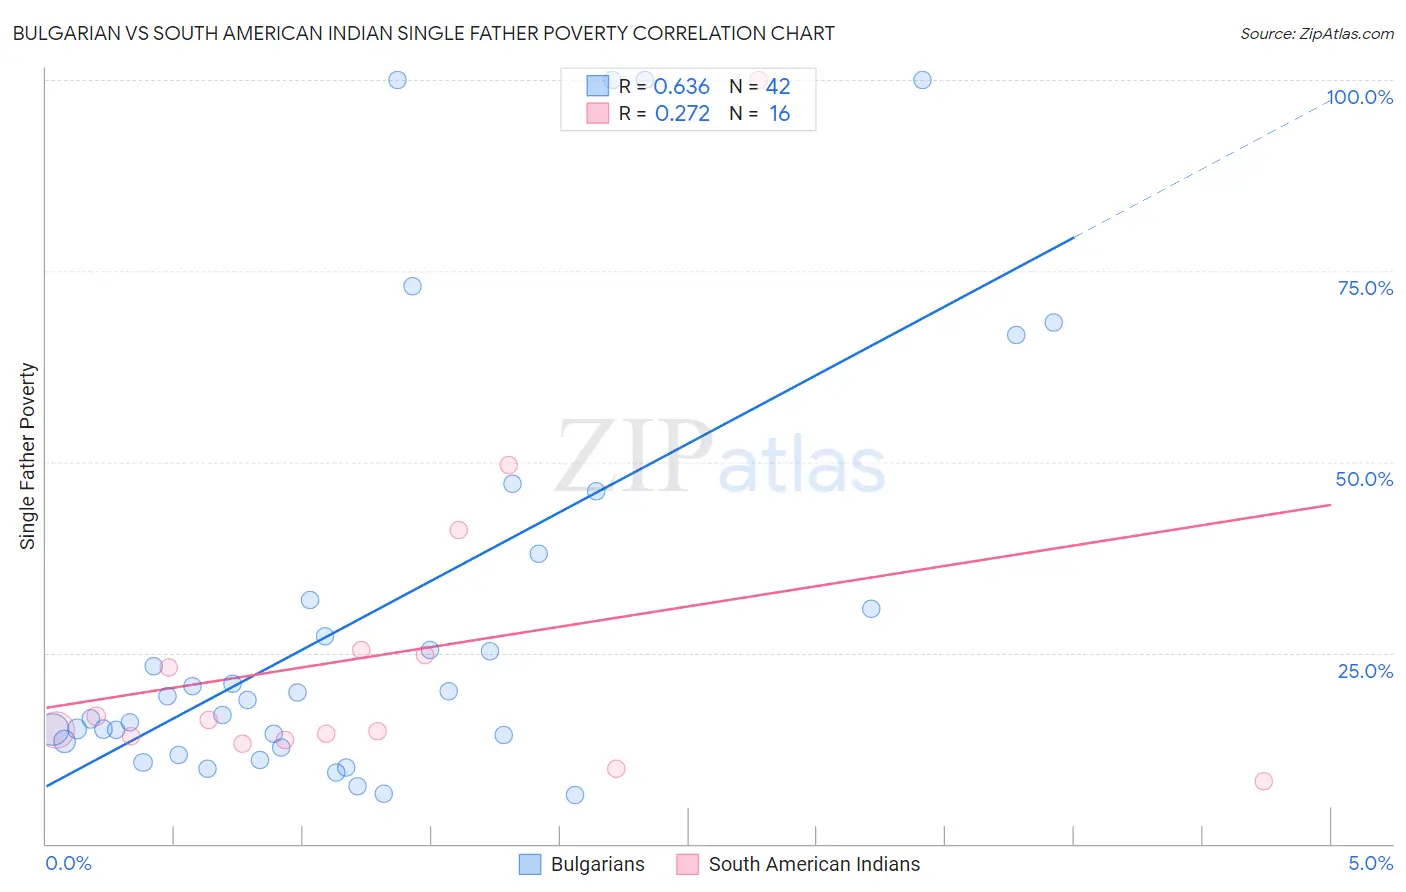 Bulgarian vs South American Indian Single Father Poverty